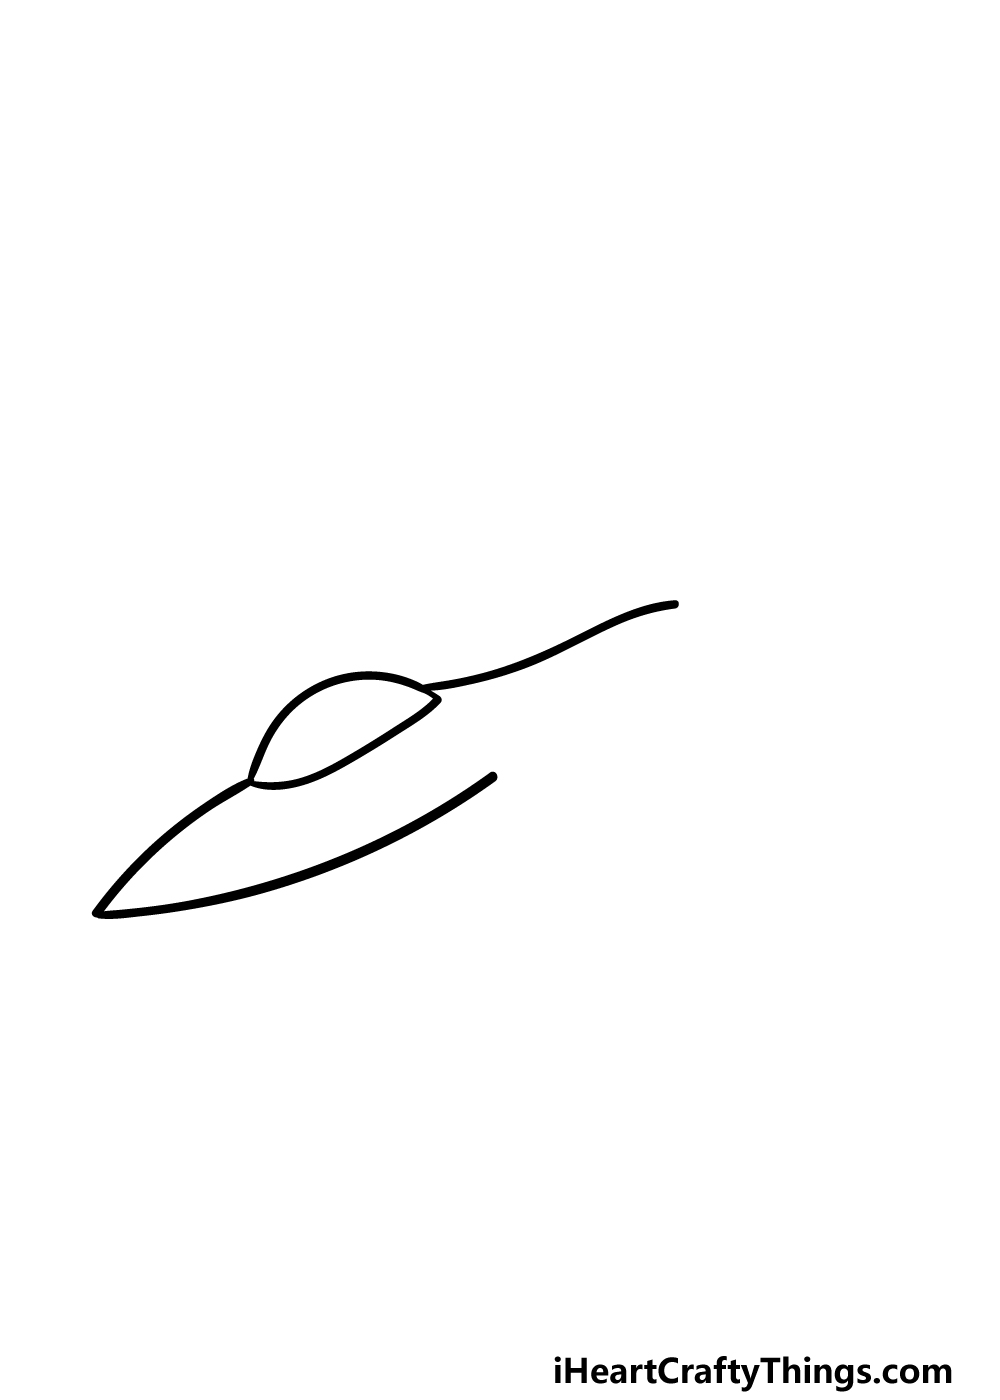 how to draw a Jet step 1